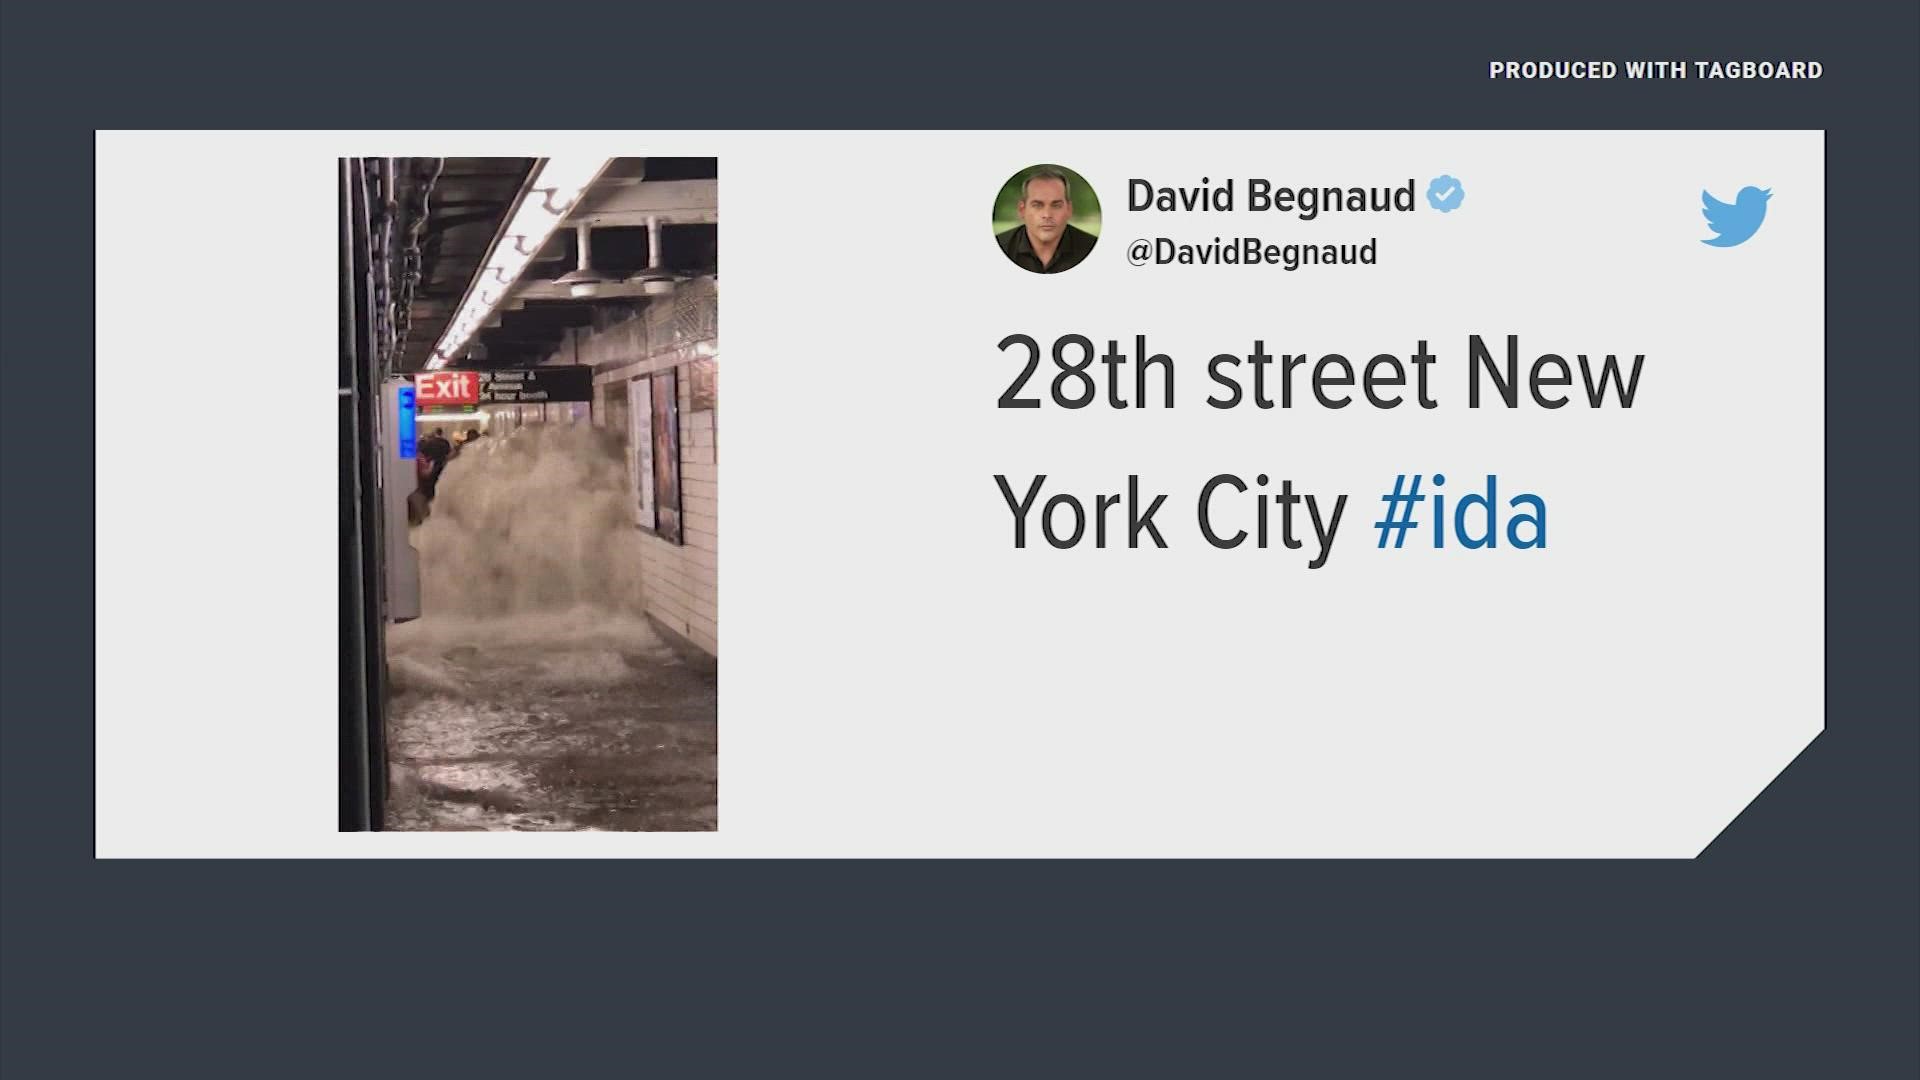 We're seeing lots of images of flooding and severe weather from the northeast, including New York City, where there's a flooding emergency.